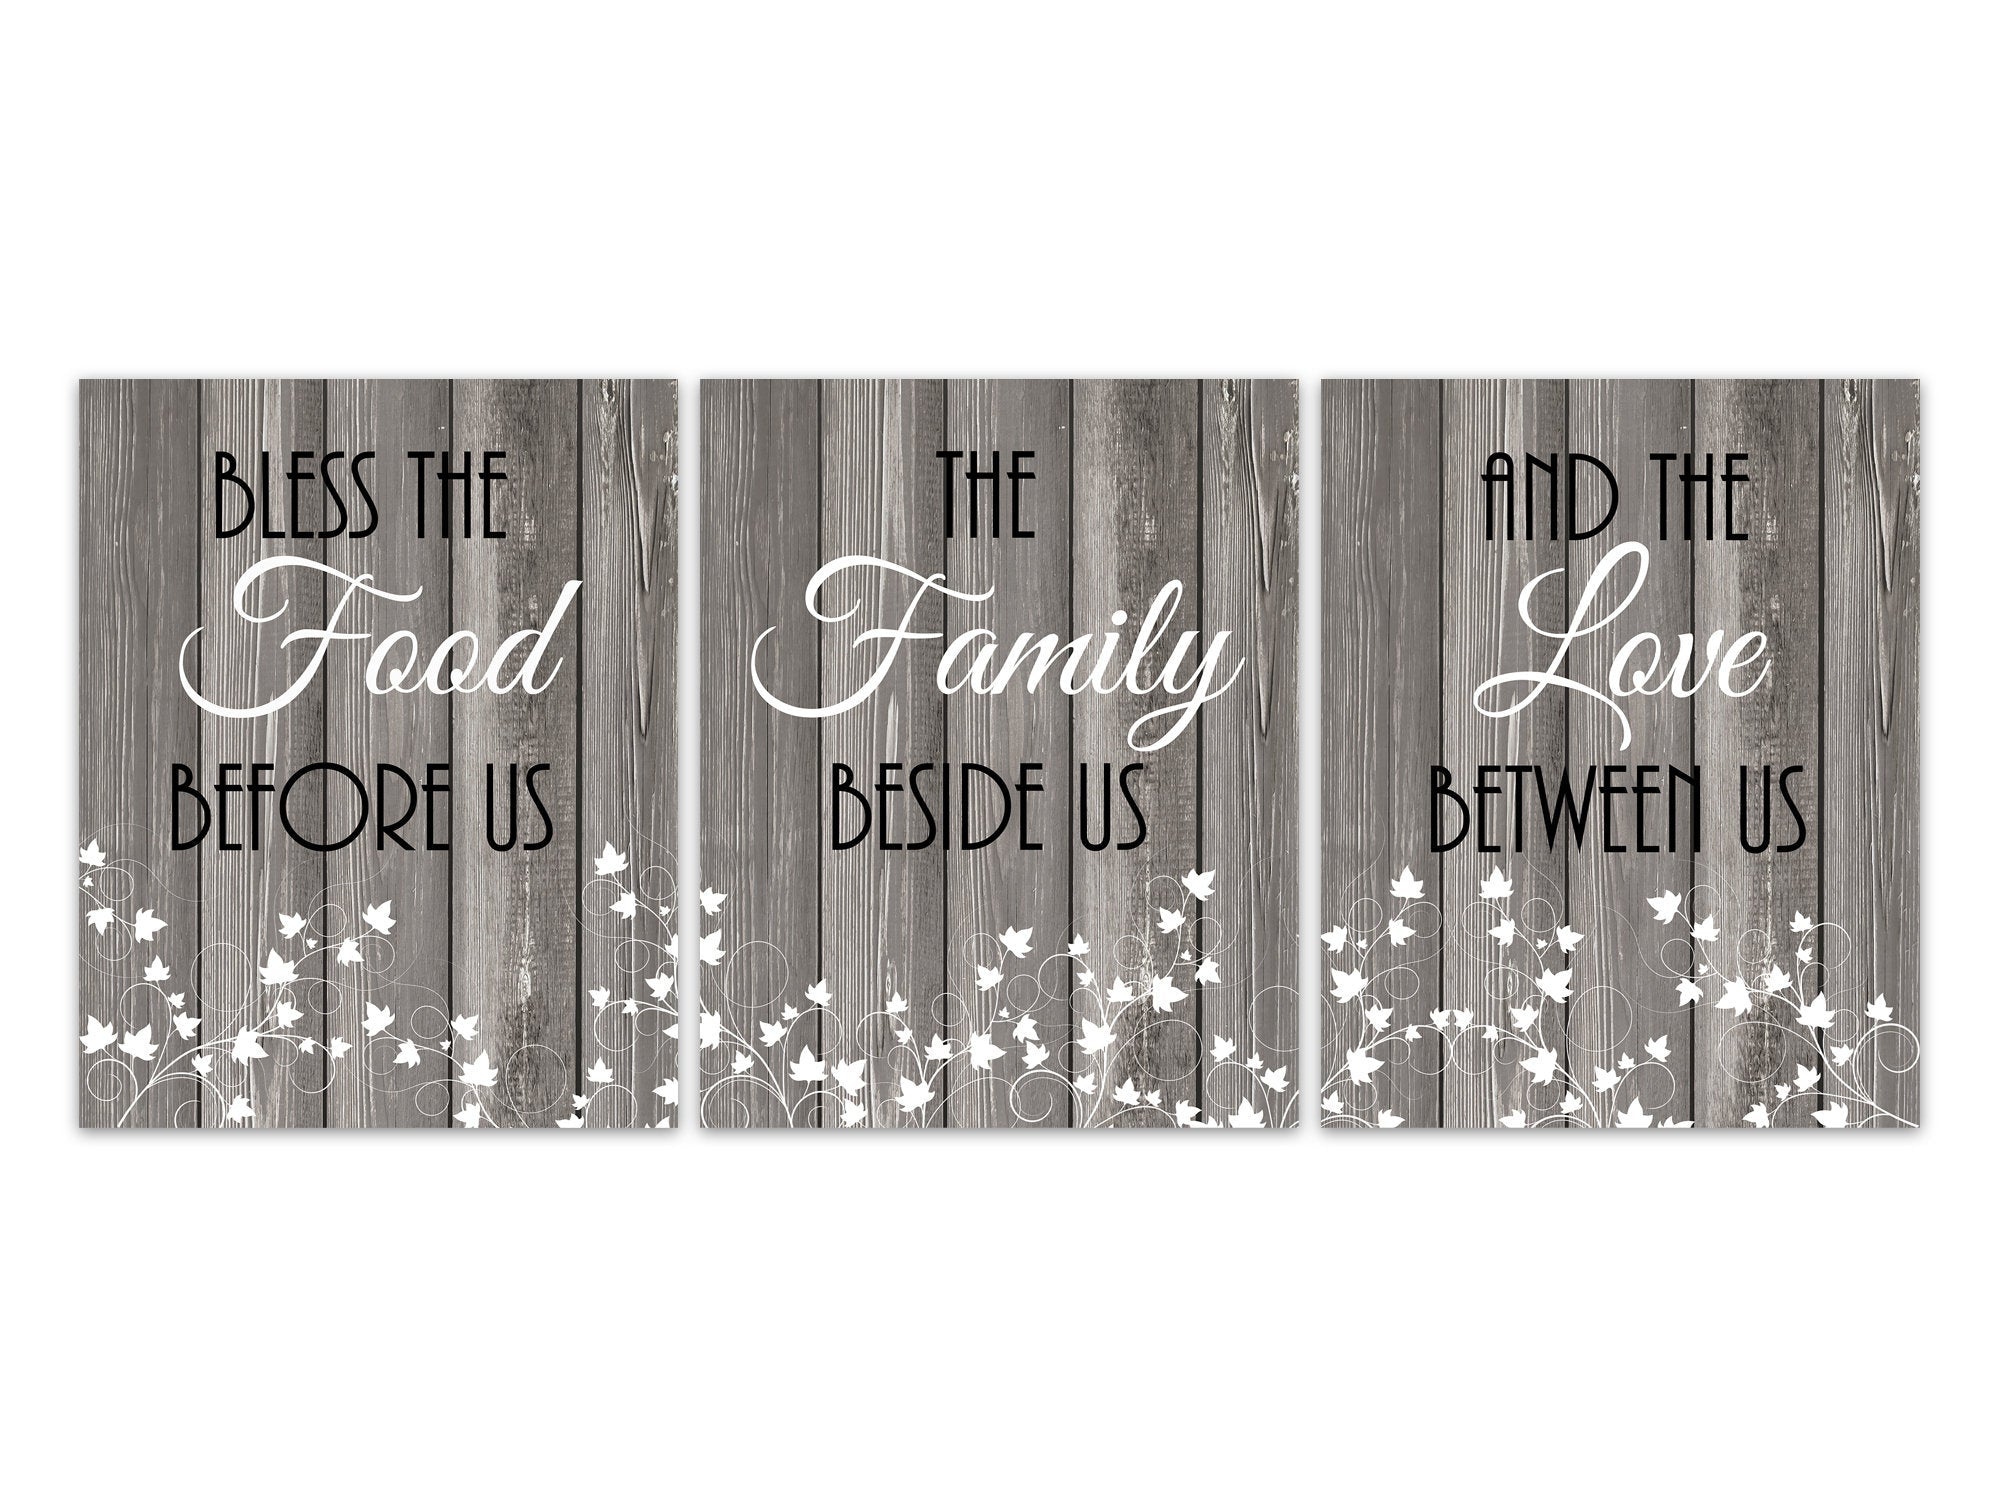 Bless The Food Before Us Kitchen Quote Art, Family Quote, Love Between Us Kitchen CANVAS, Dining Room Decor, Rustic Home Decor - HOME322